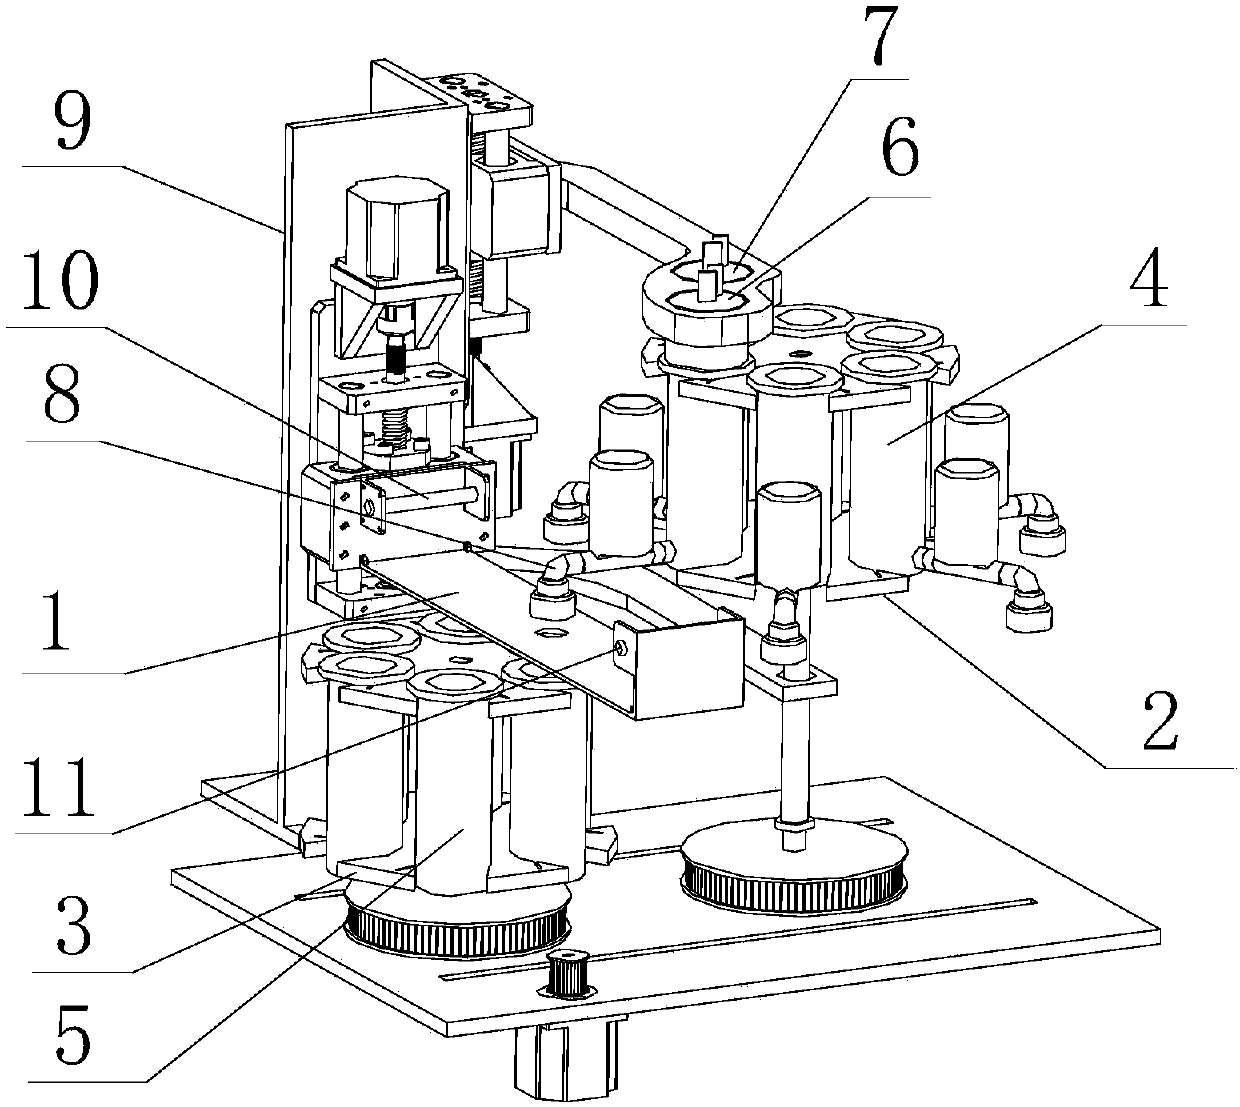 High-efficiency automatic soil filtering device